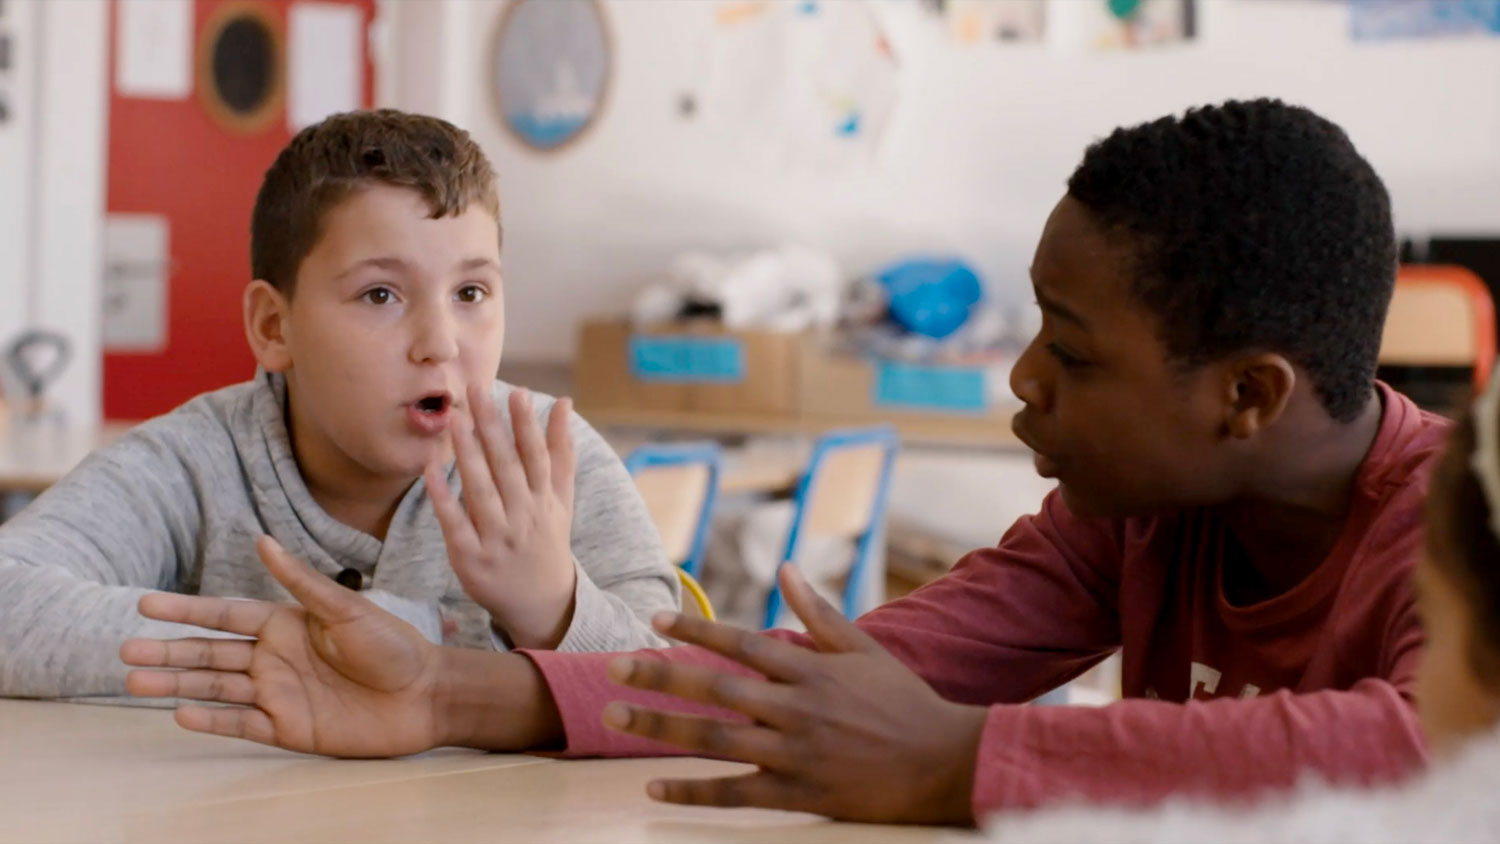 Two young boys seating in an elementary school classroom in active and animated discussion. 